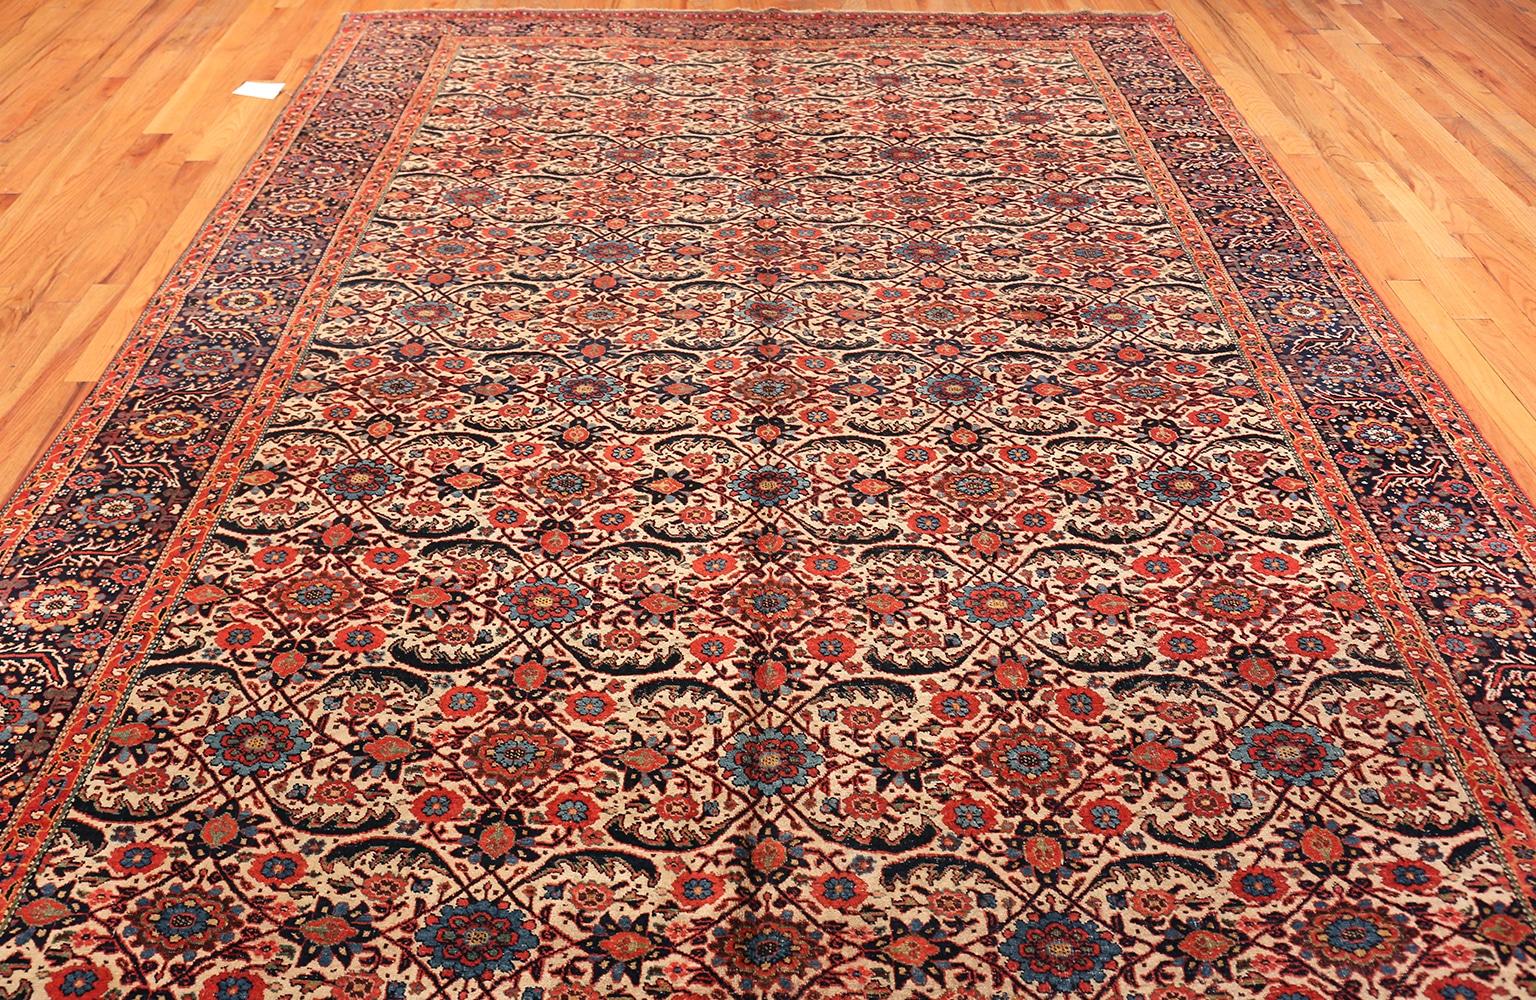 Beautiful Gallery Size Antique Persian Bidjar Rug, Country of Origin / Rug Type: Antique Persian Rugs, Circa Date: 1900 – This magnificent gallery-sized rug from Bidjar is impressive for its size and a spectacular all-over pattern. At the turn of